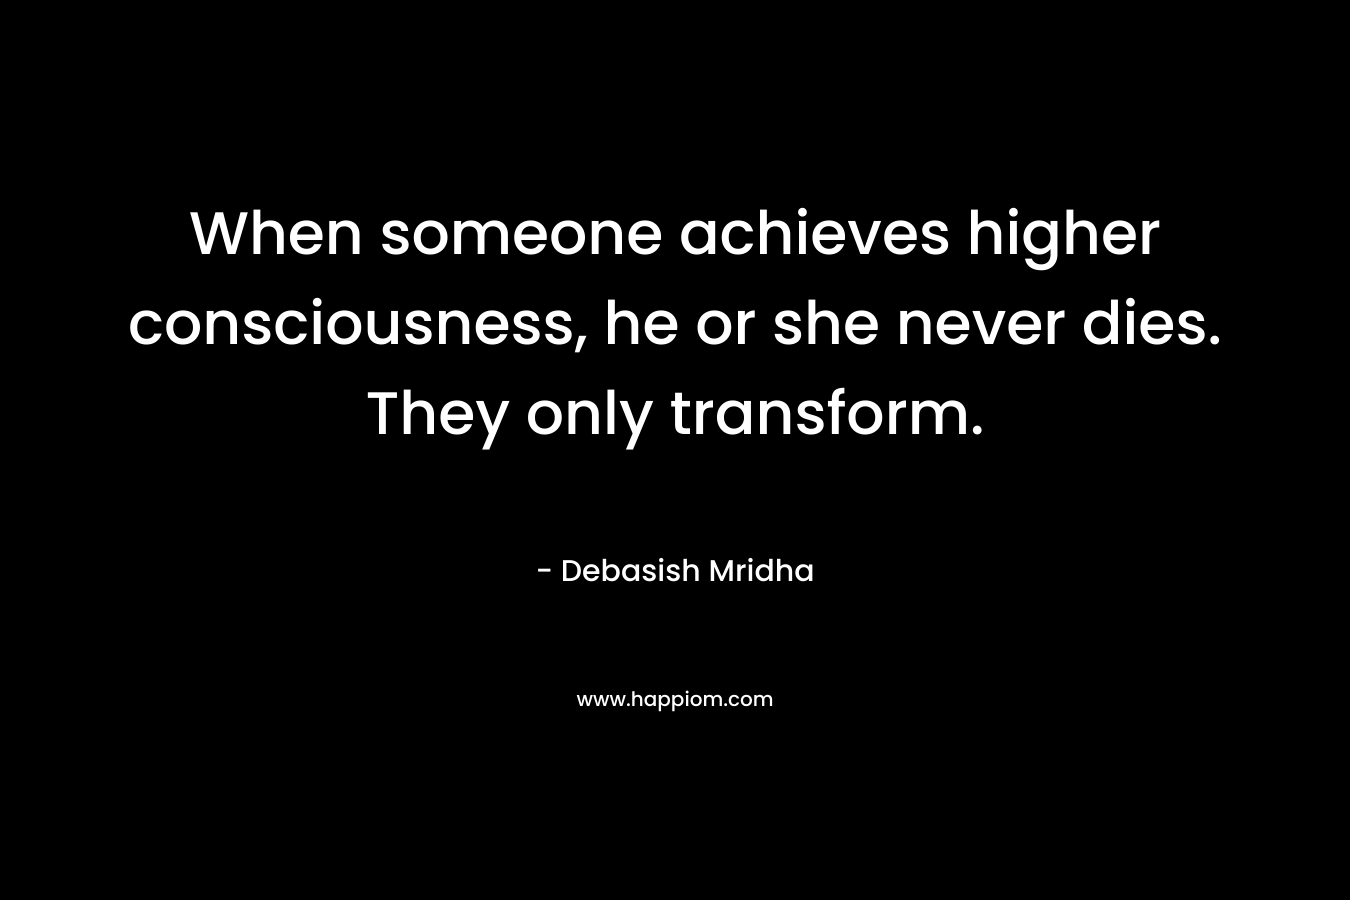 When someone achieves higher consciousness, he or she never dies. They only transform.